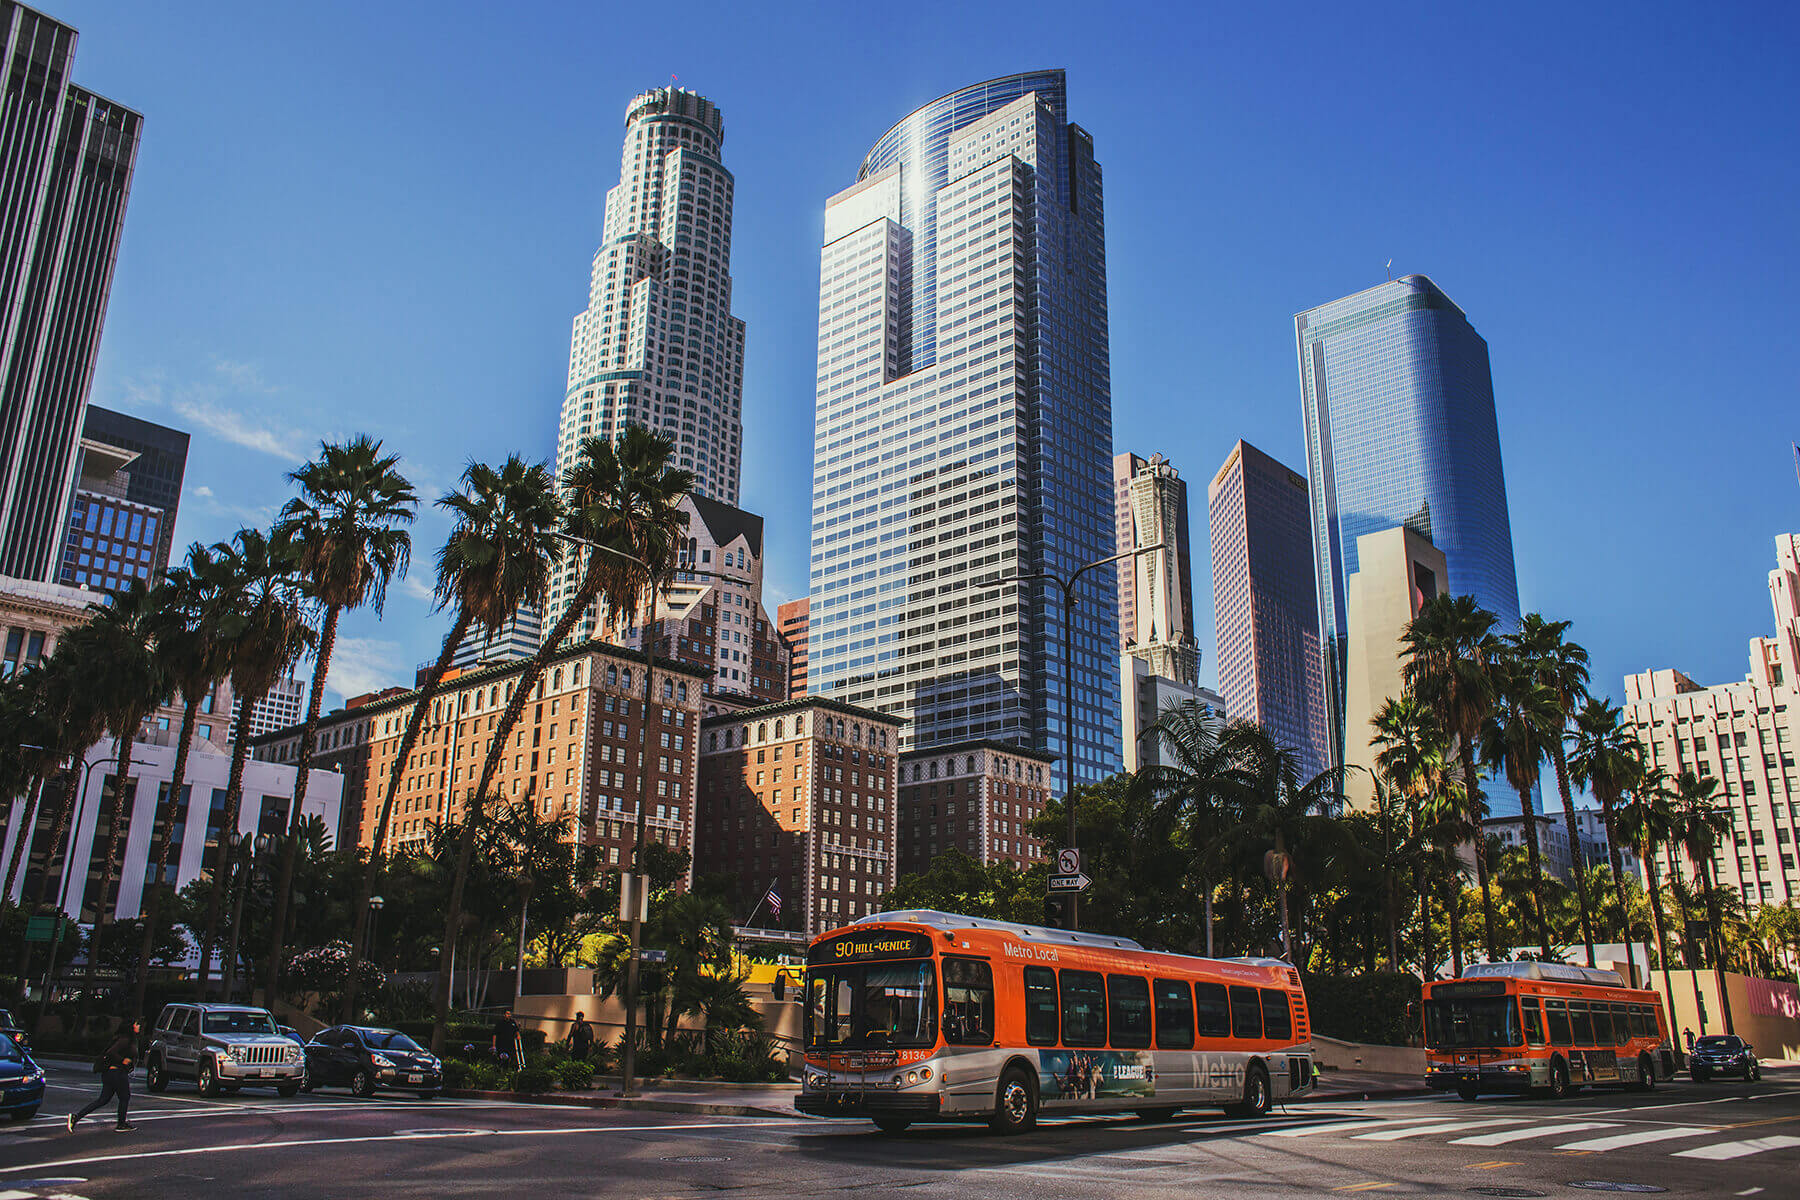 Architectural tour of Downtown Los Angeles